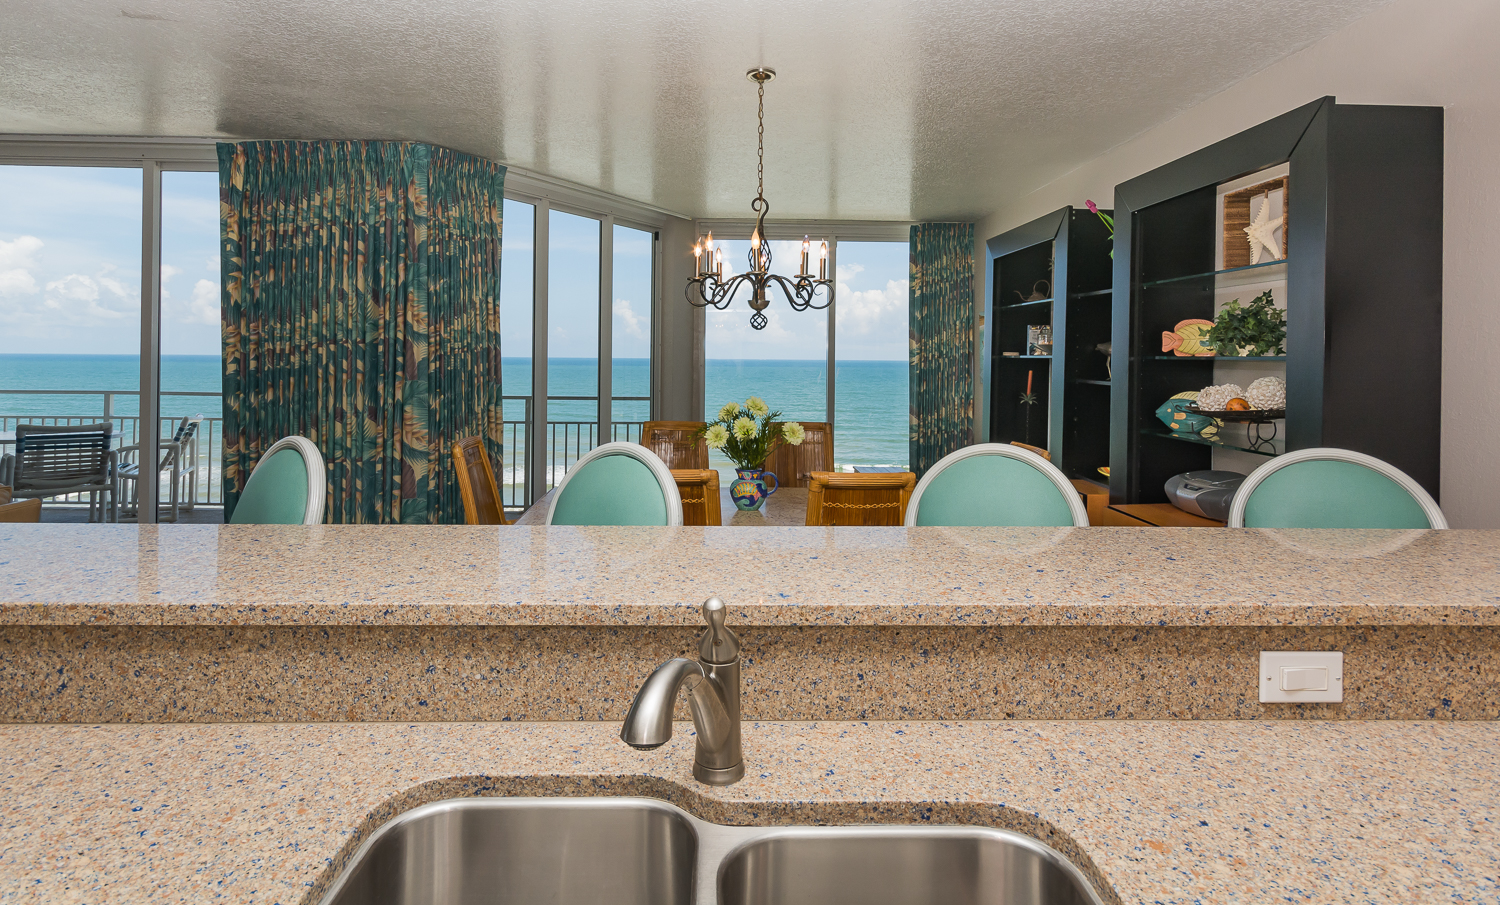 Kitchen counter seating with ocean views.